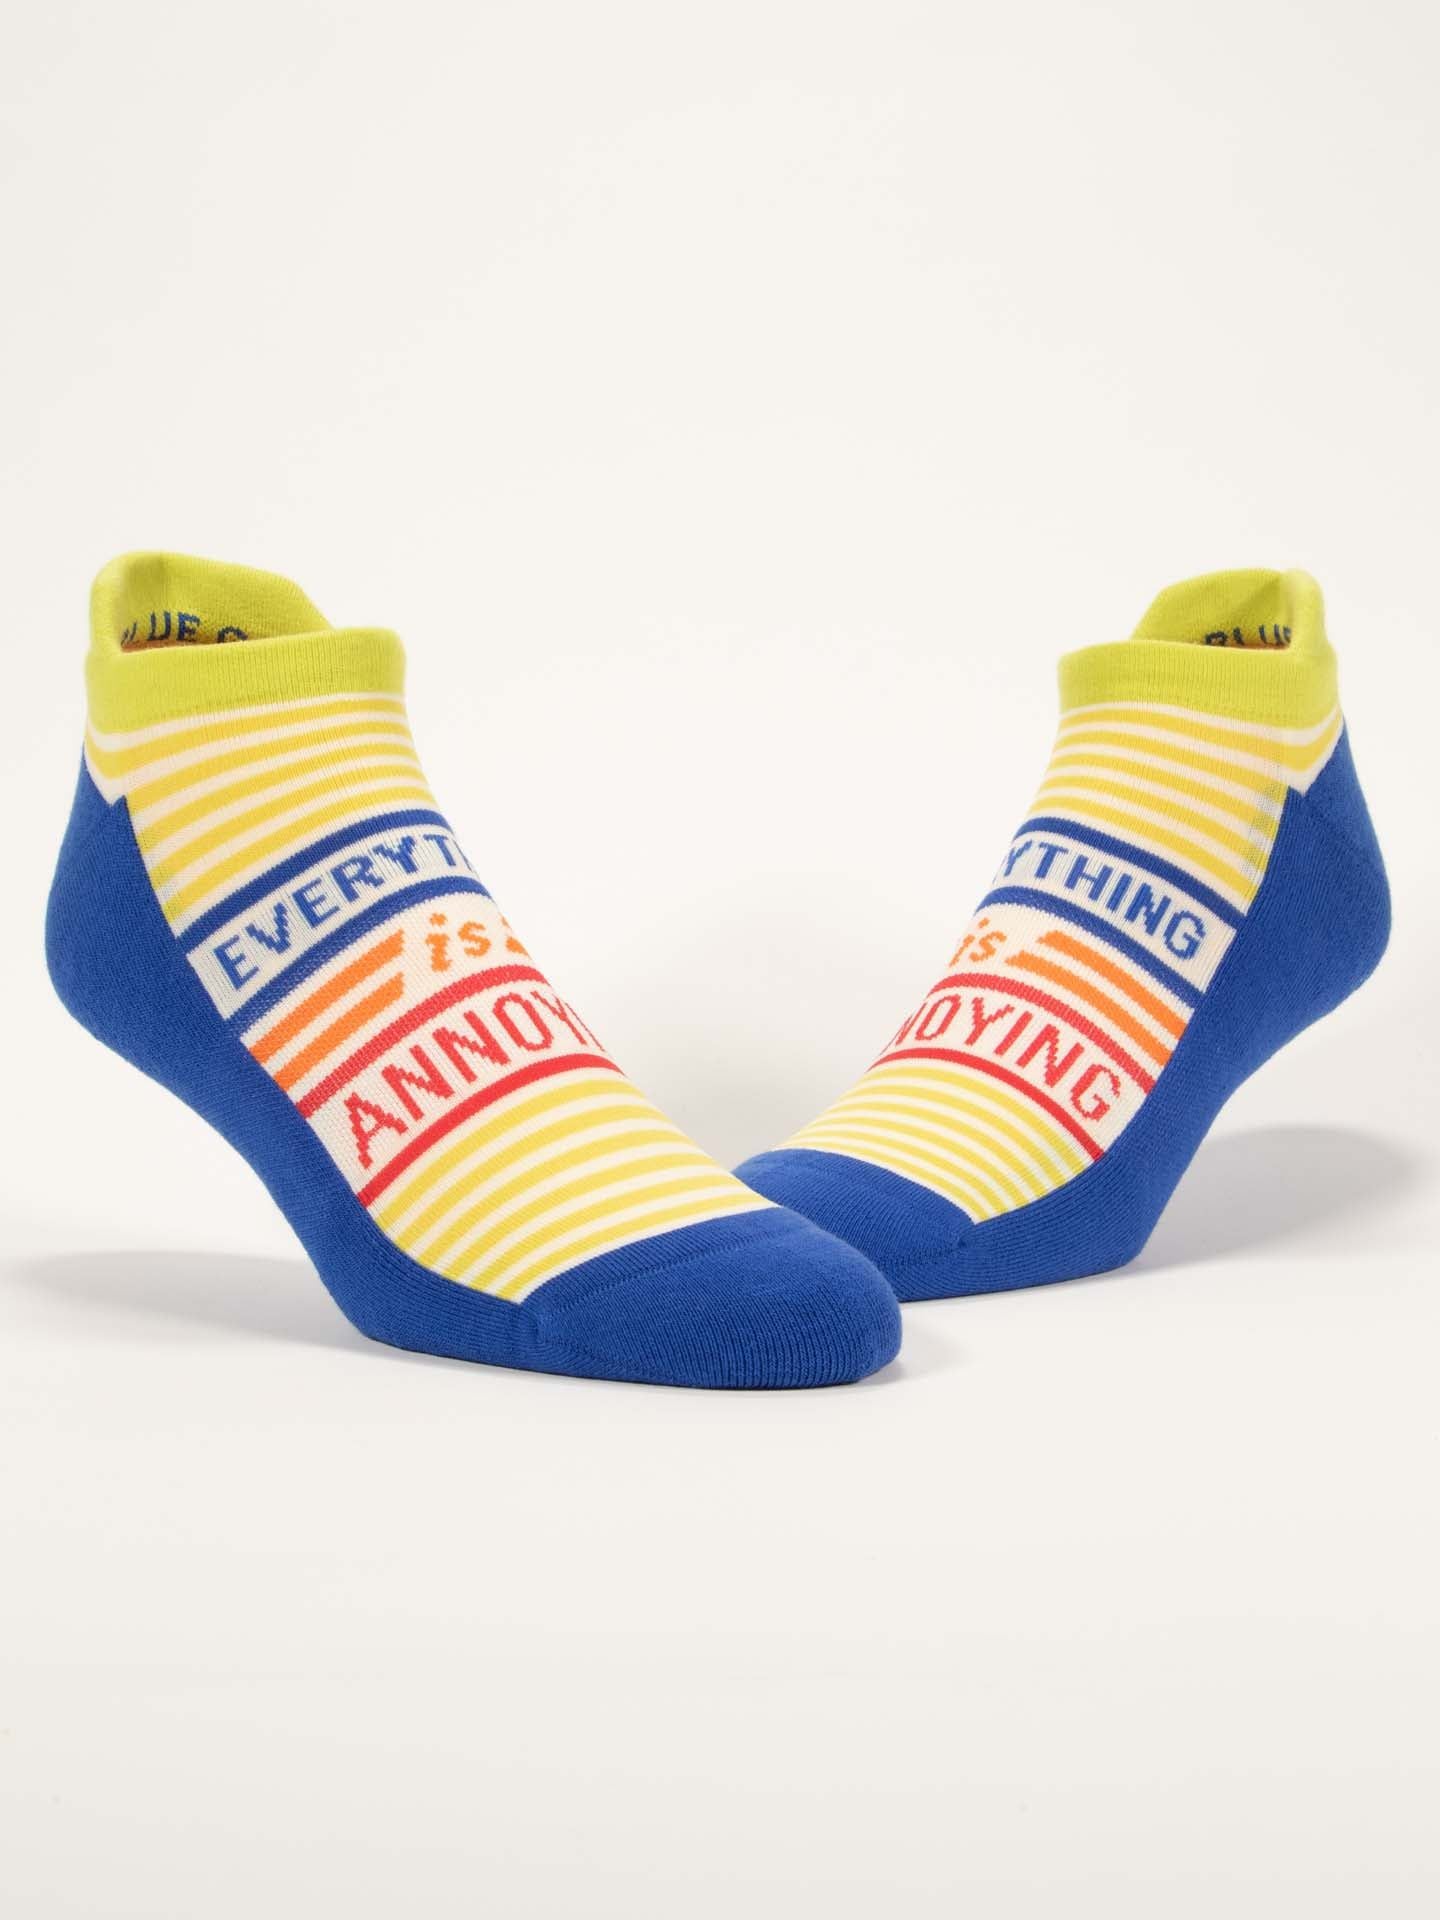 Everything Is Annoying Sneaker Socks-Apparel > Apparel & Accessories > Clothing > Underwear & Socks-Quinn's Mercantile